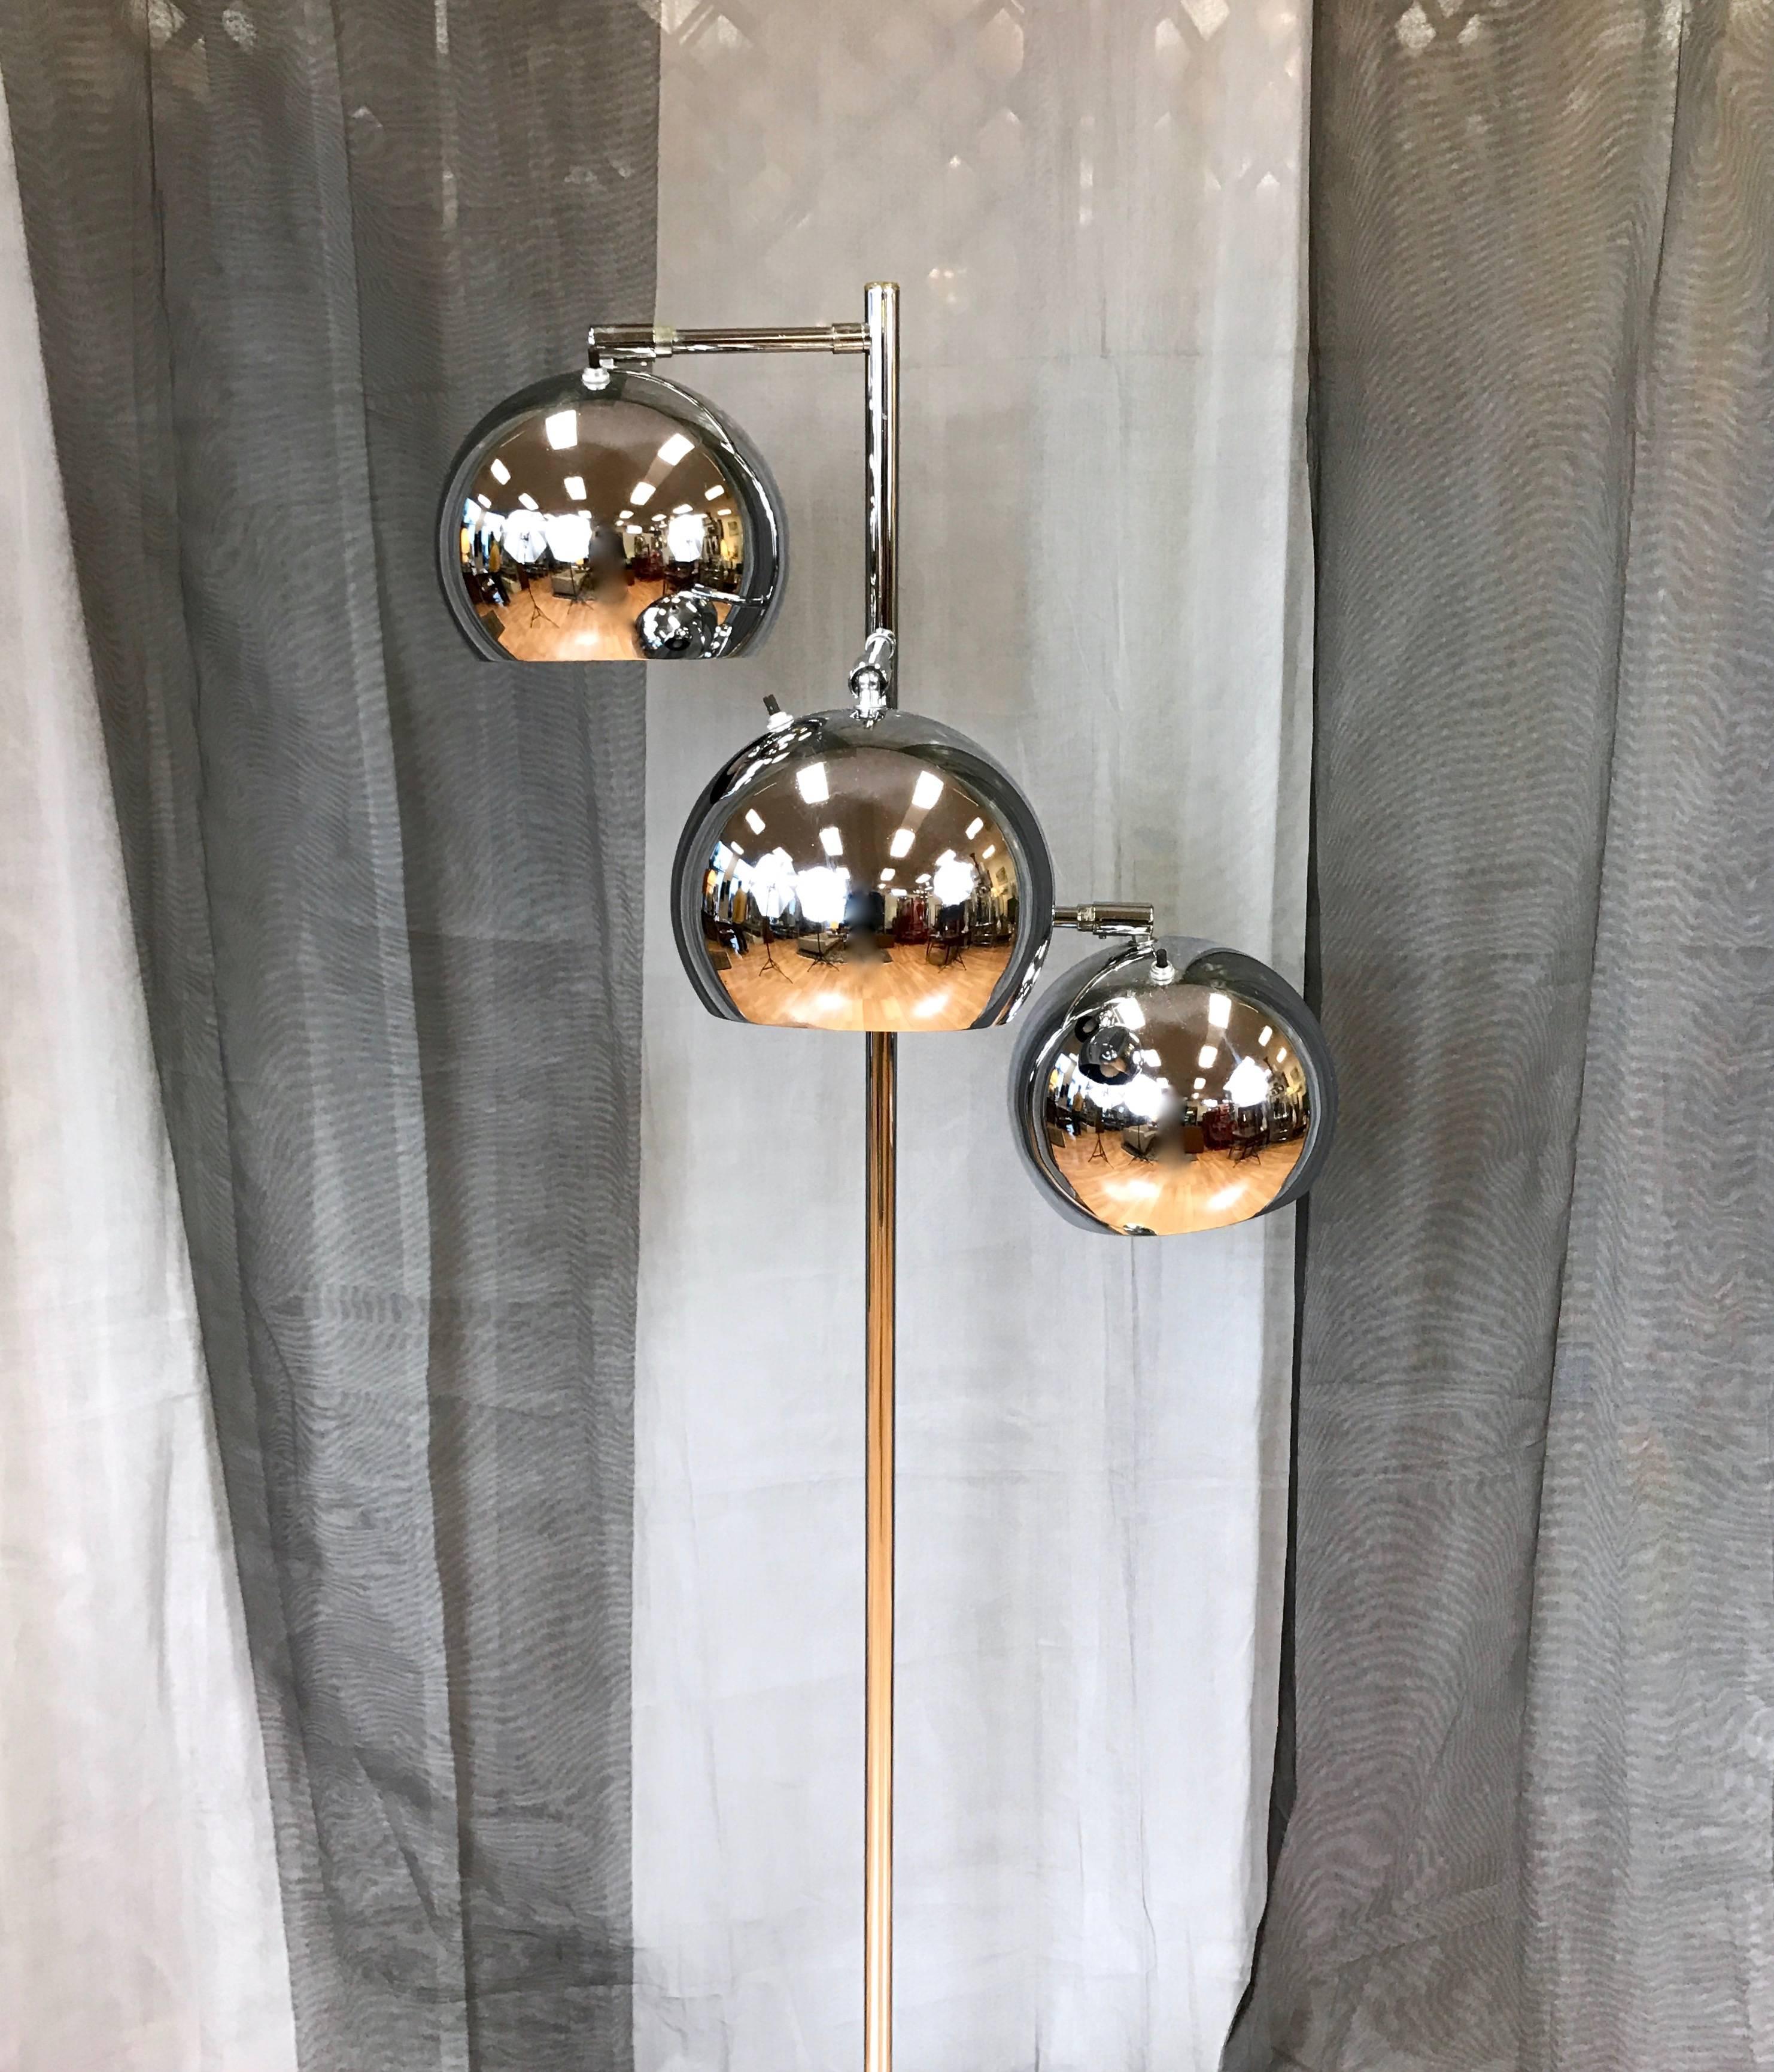 A chrome floor lamp with articulated shades by OMI for Koch & Lowy. Large “eyeball”-style globe shades swivel up and down via ball joints, and have matte black interiors. They’re slightly larger in diameter than those found on similar lamps by